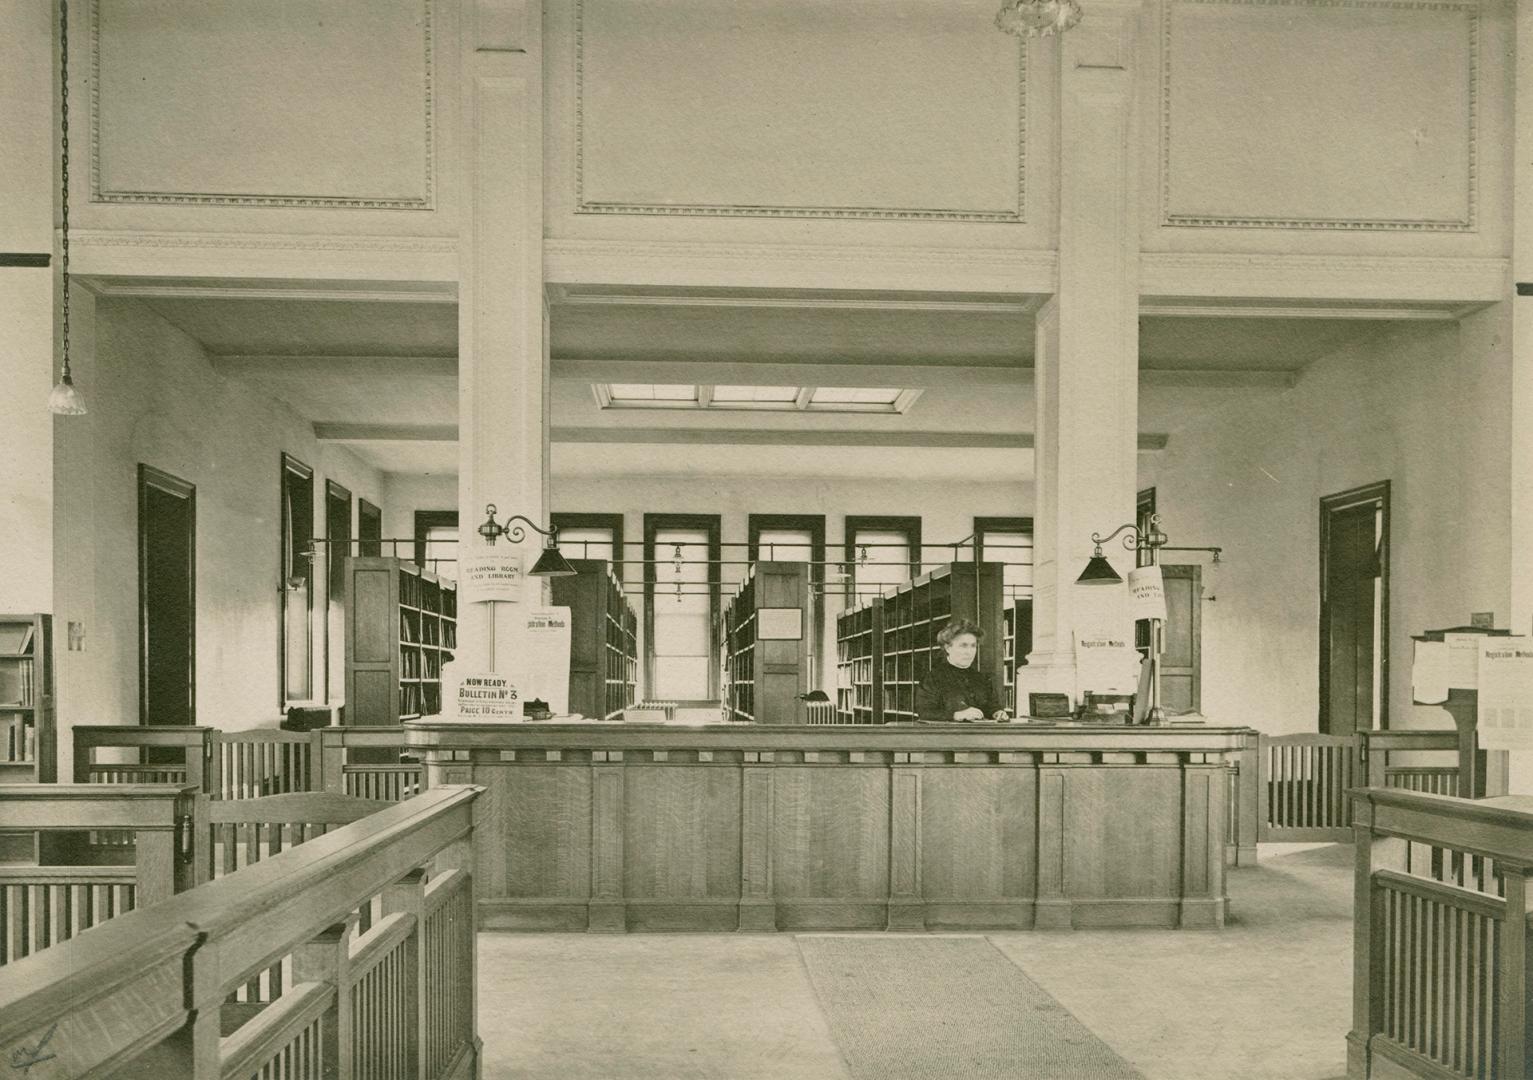 Interior of a library with wooden desk, pillars and bookshelves. 